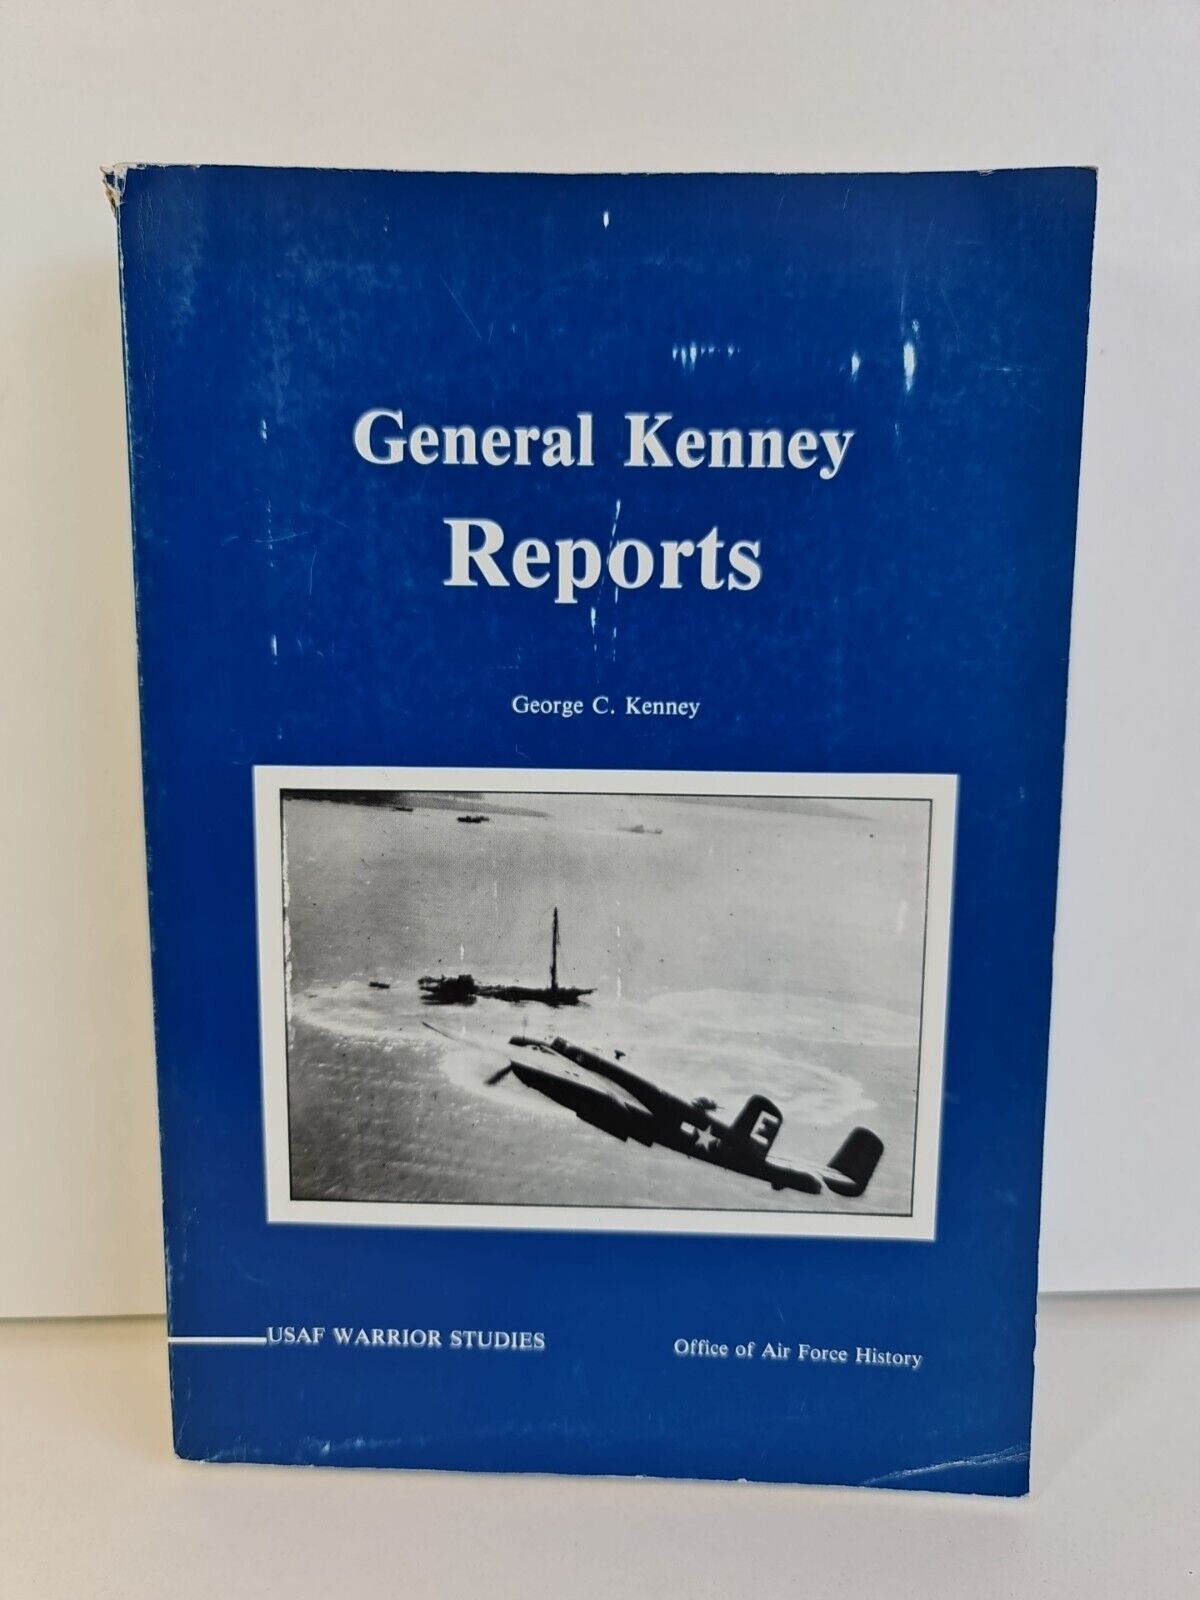 General Kenney Reports by George C Kenney (1987)